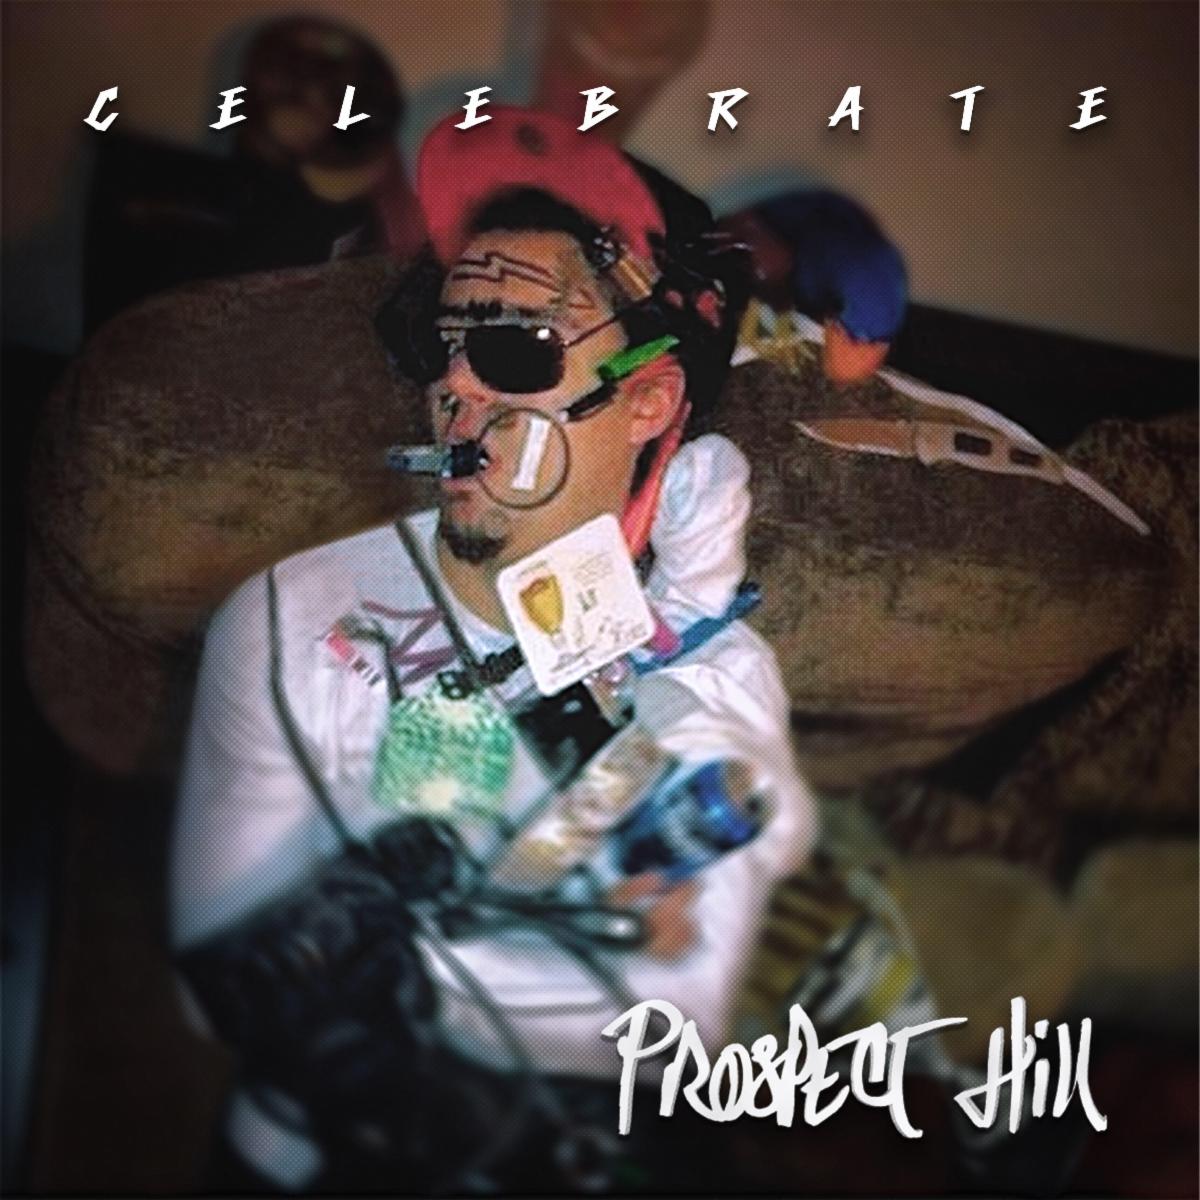 Prospect Hill Releases "Celebrate" - A Single Written for Our Times!